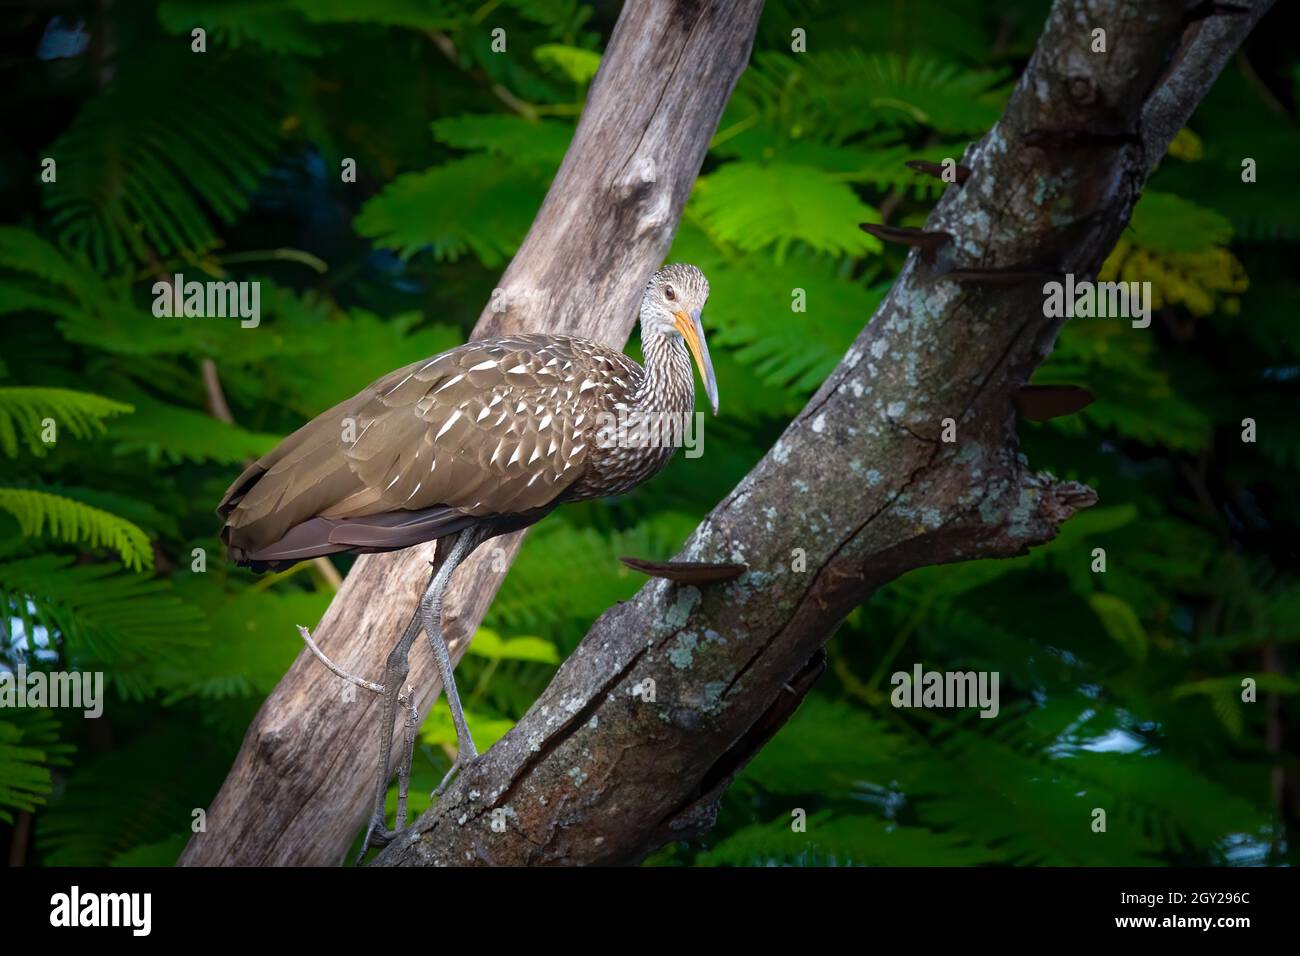 A Limpkin lands in a tree after a swim in the Florida Everglades. Limpkins seem to love this tree as it's right next to a small creek. Stock Photo